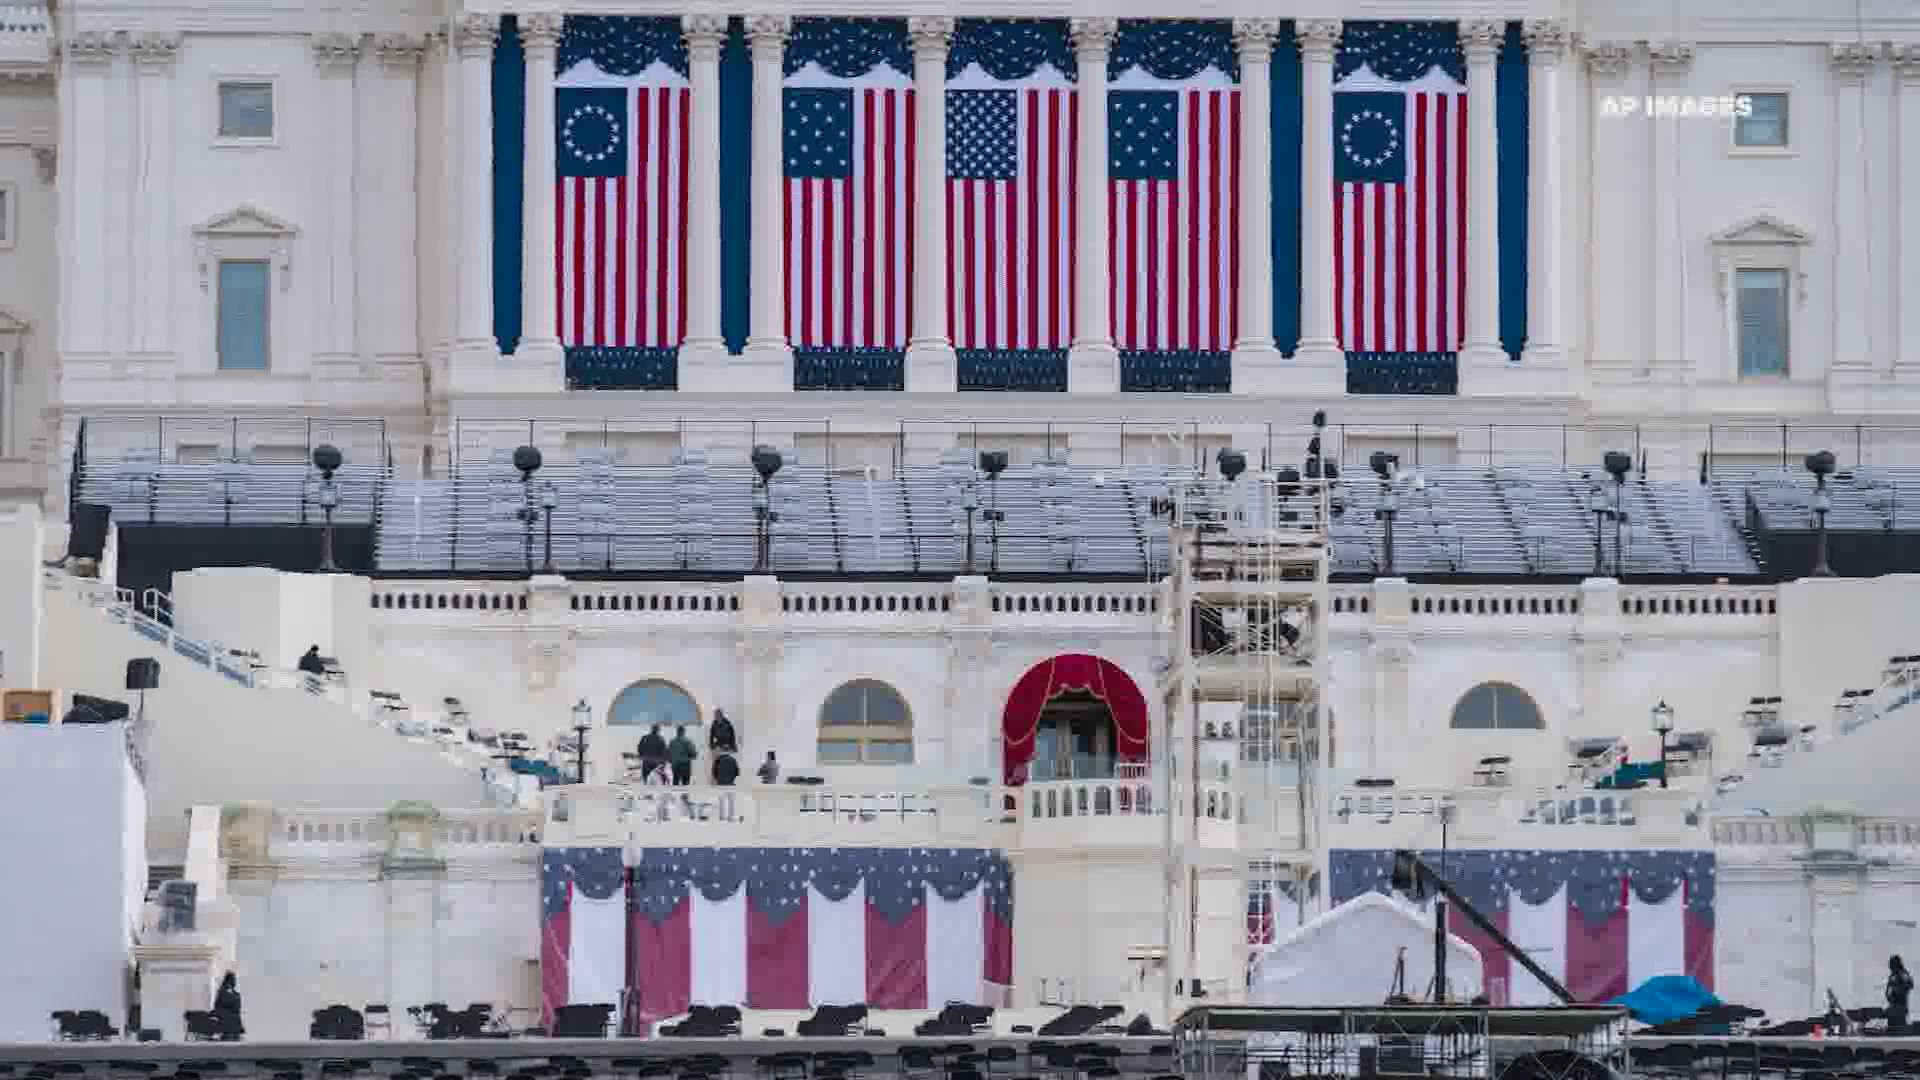 Washington D.C. is locked down and more than 25,000 National Guard members are patrolling the Capitol to ensure a smooth and peaceful transfer of power.